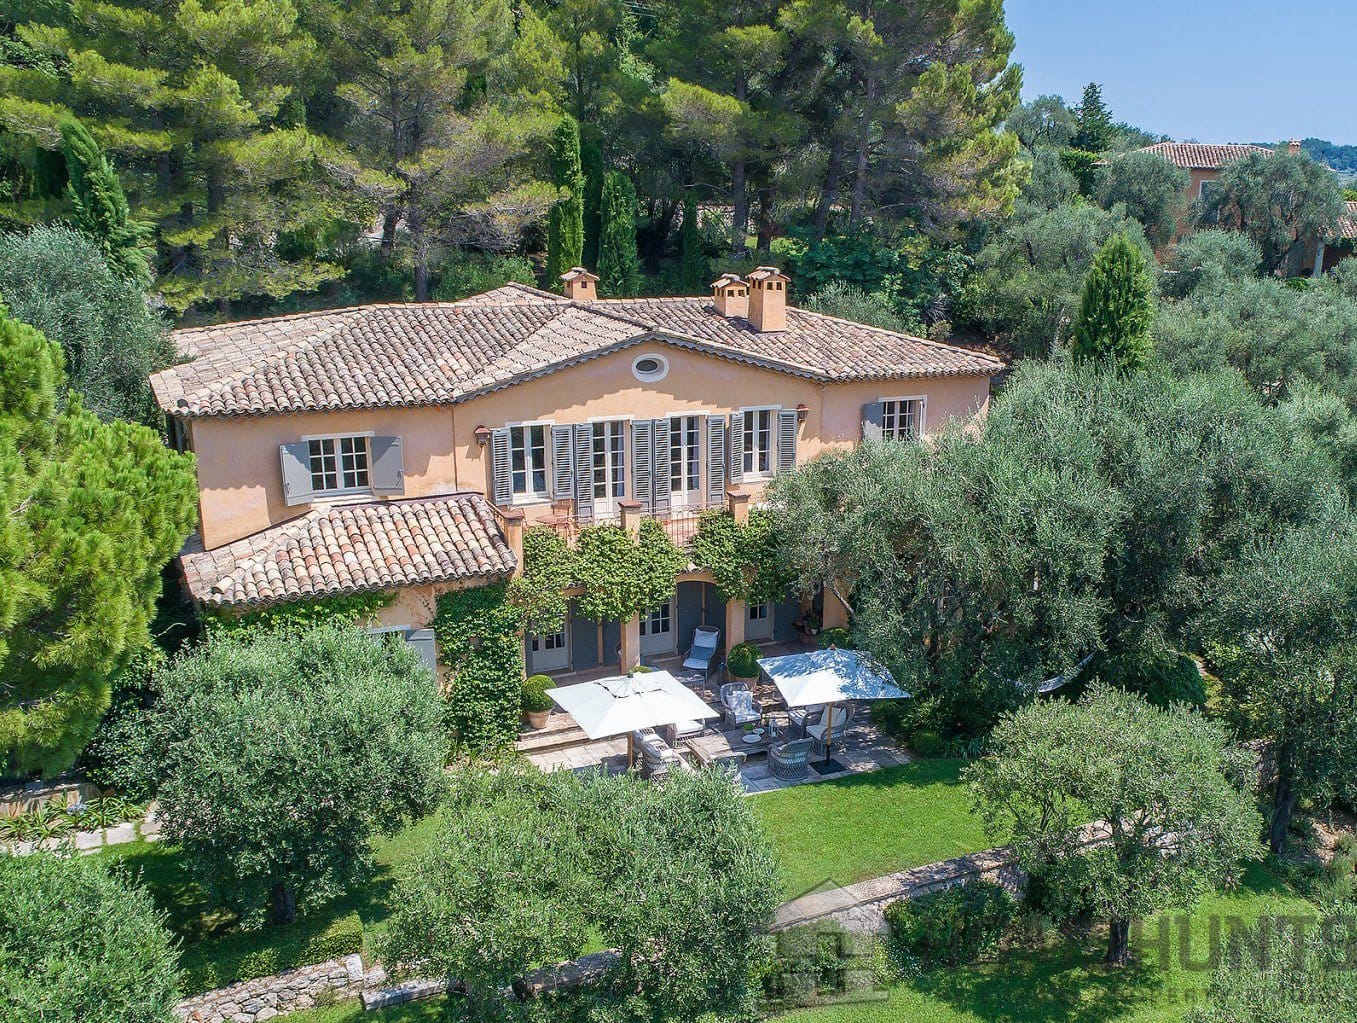 12 Bedroom Castle/Estates in Chateauneuf Grasse 15